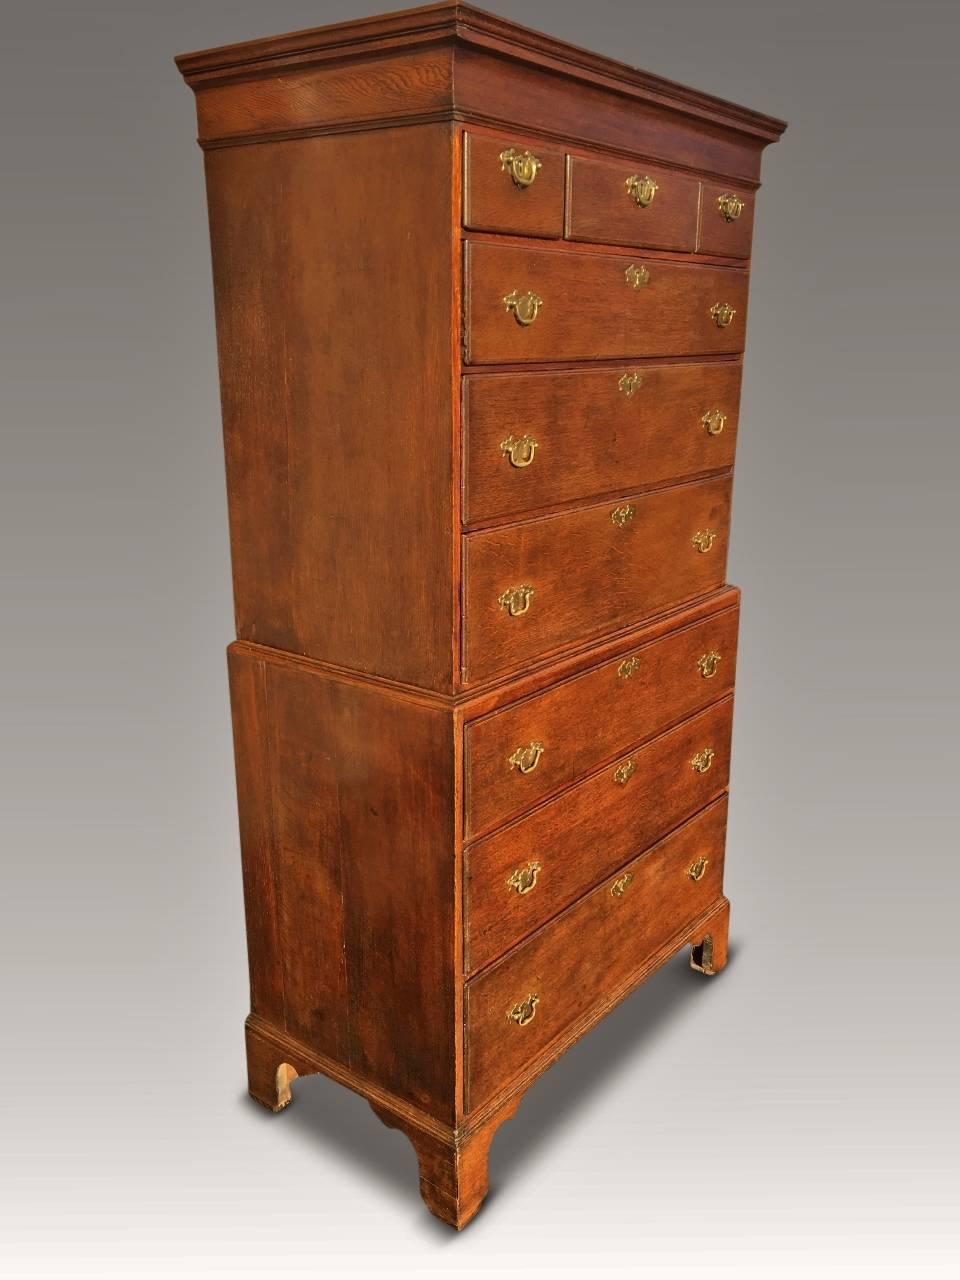 A most attractive antique oak chest on chest which is English and dated to about, circa 1790-1800.

This delightful chest stands on original bracket feet, has brass drop handles upon nine drawers and stands only 73 inches high. All the drawers are